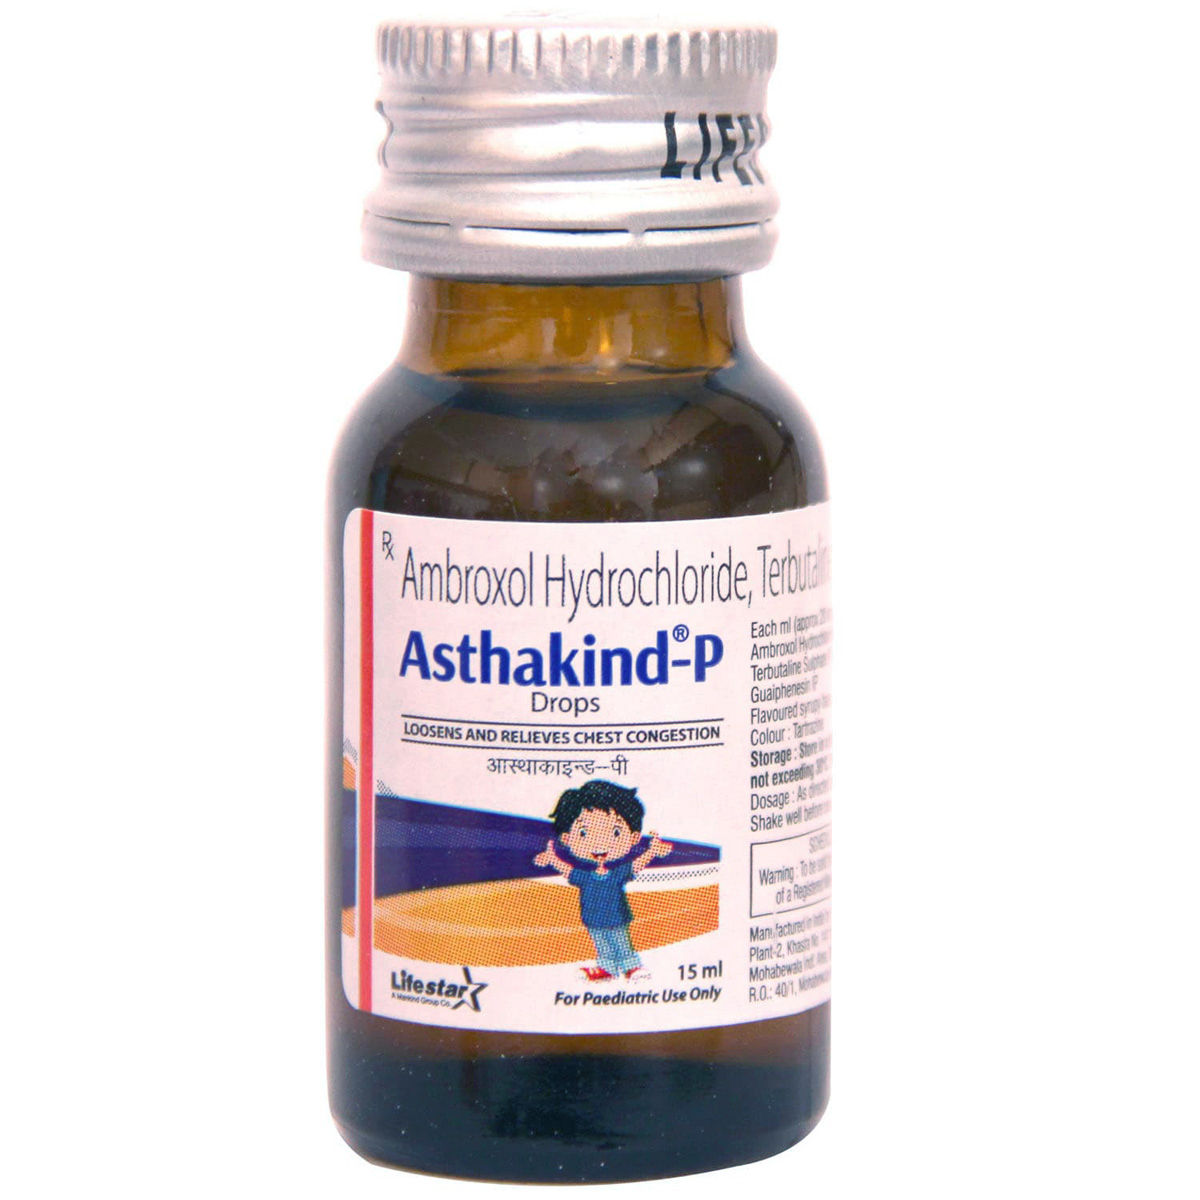 Asthakind P Drops 15 ml Price, Uses, Side Effects, Composition ...